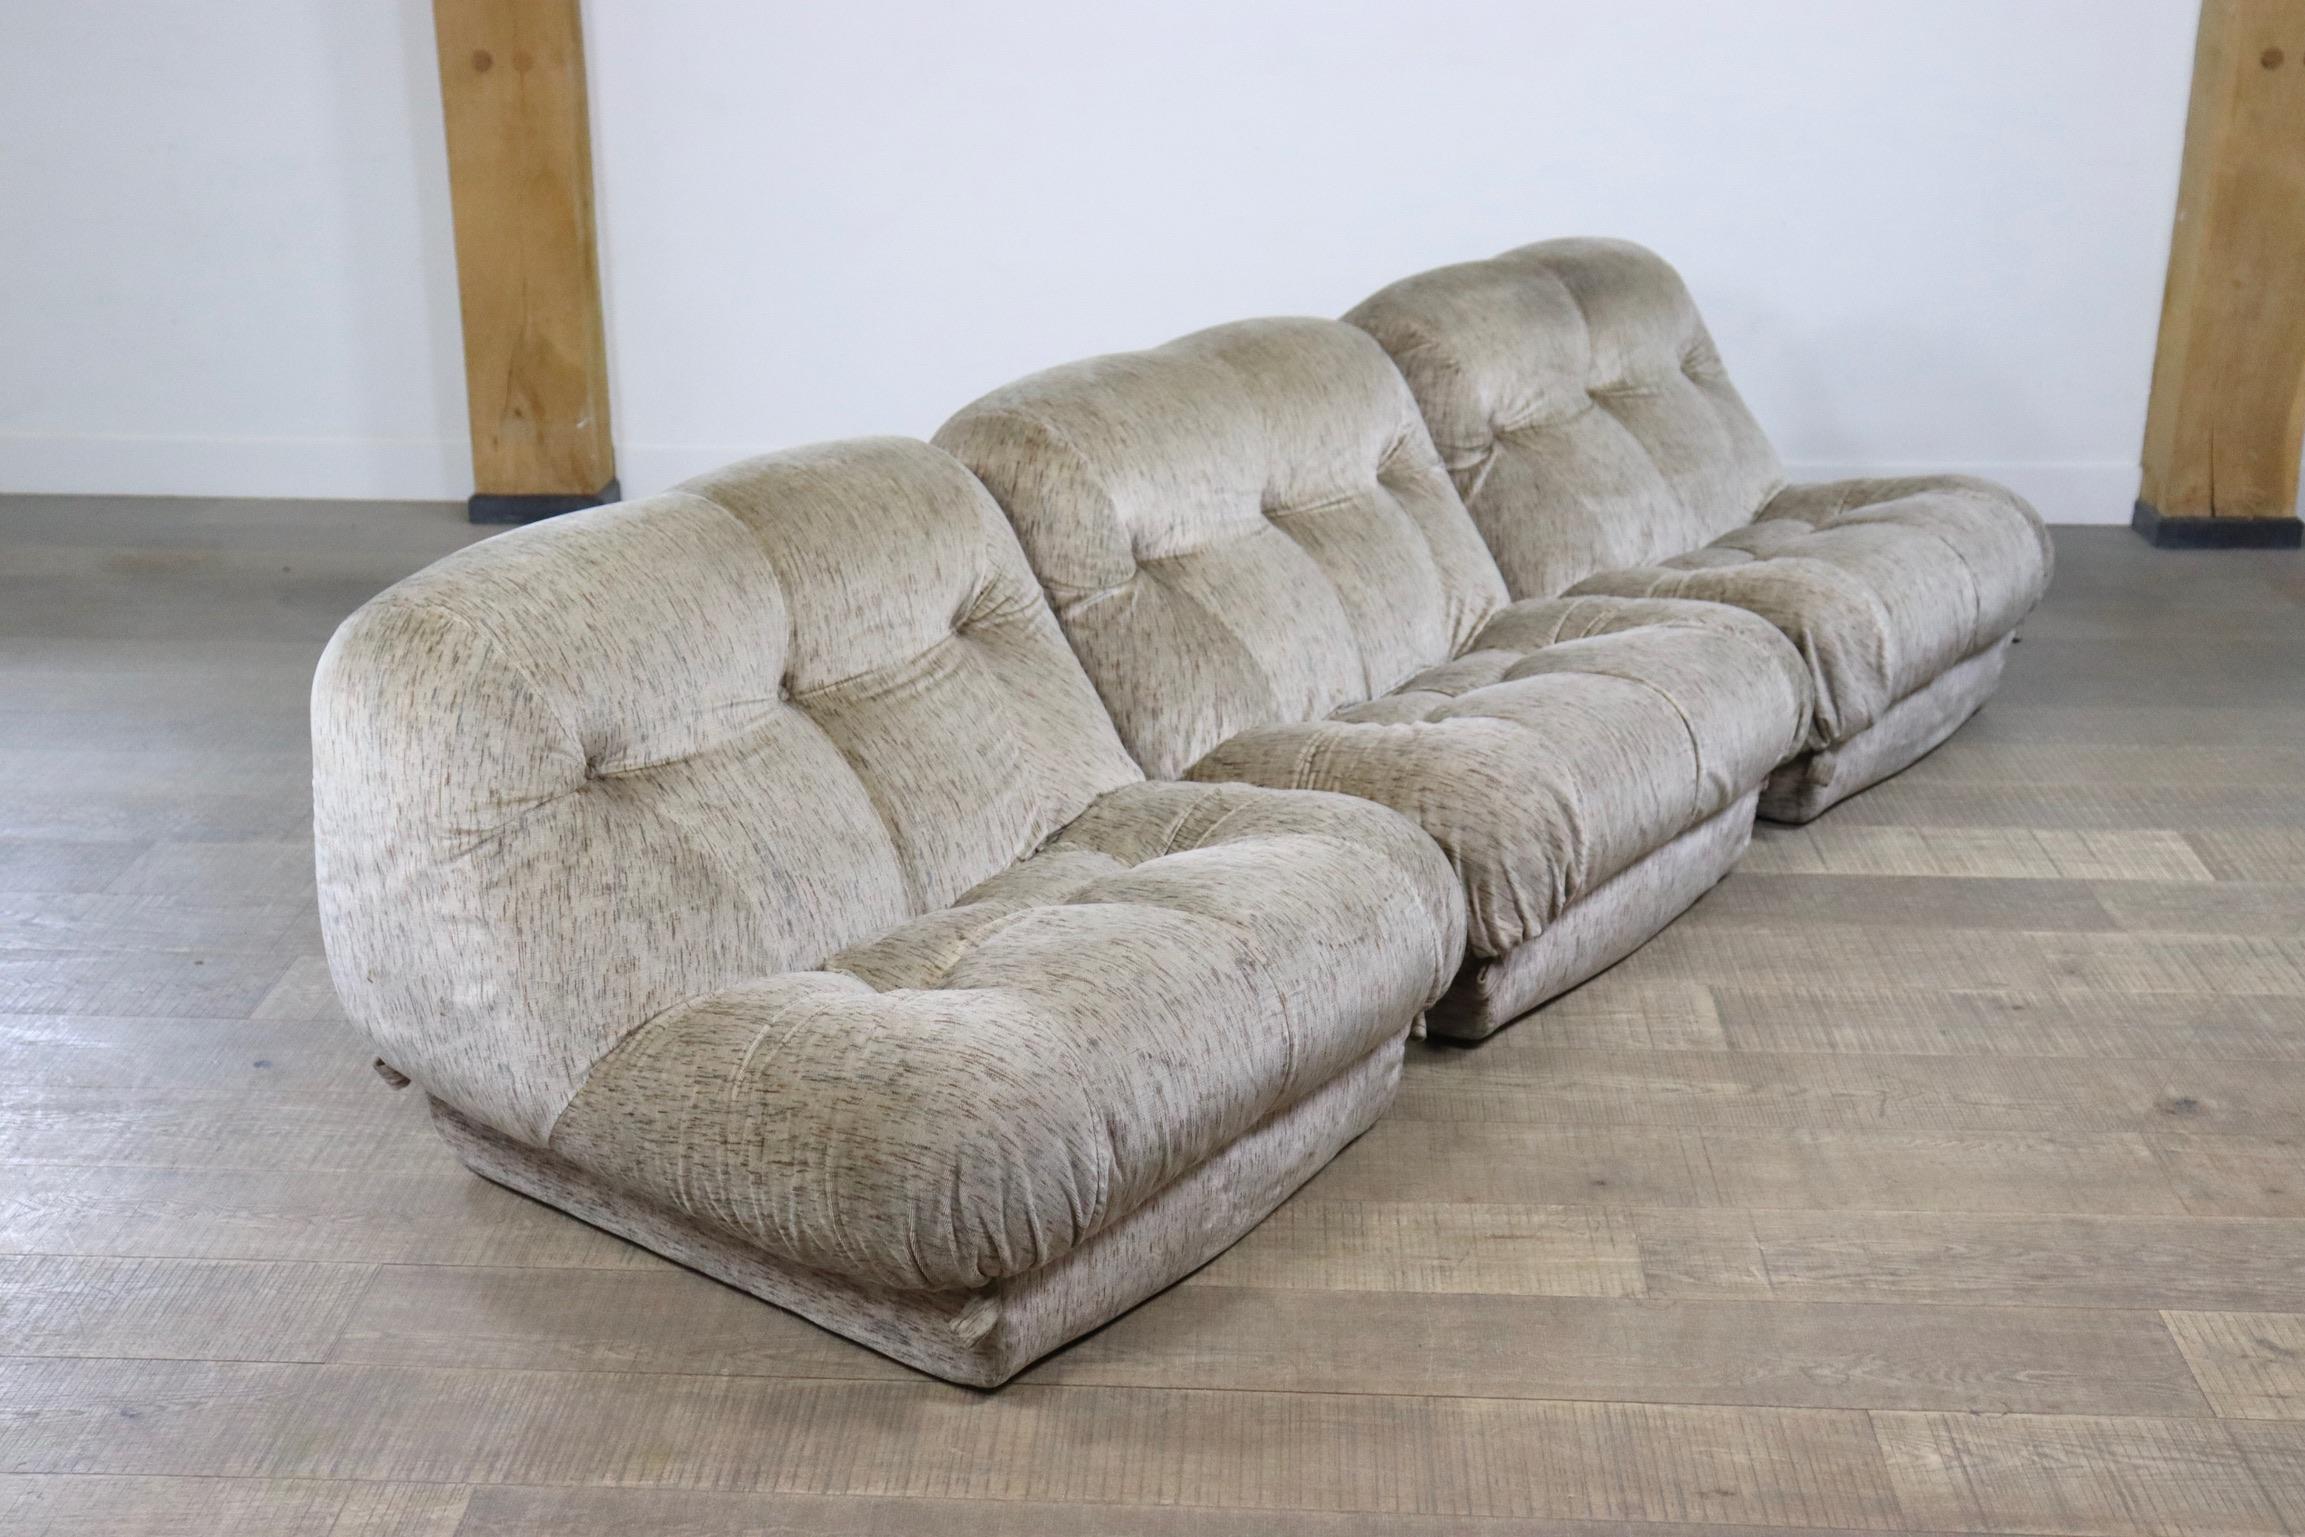 Stunning modular sofa Rino Maturi for Mimo Padova model ´Nuvolone´ in beige printed velvet original upholstery, Italy, 1970s. The 'Nuvulone', meaning 'cloud' in Italian, sofa consists out of three elements, which can be arranged to your own liking.